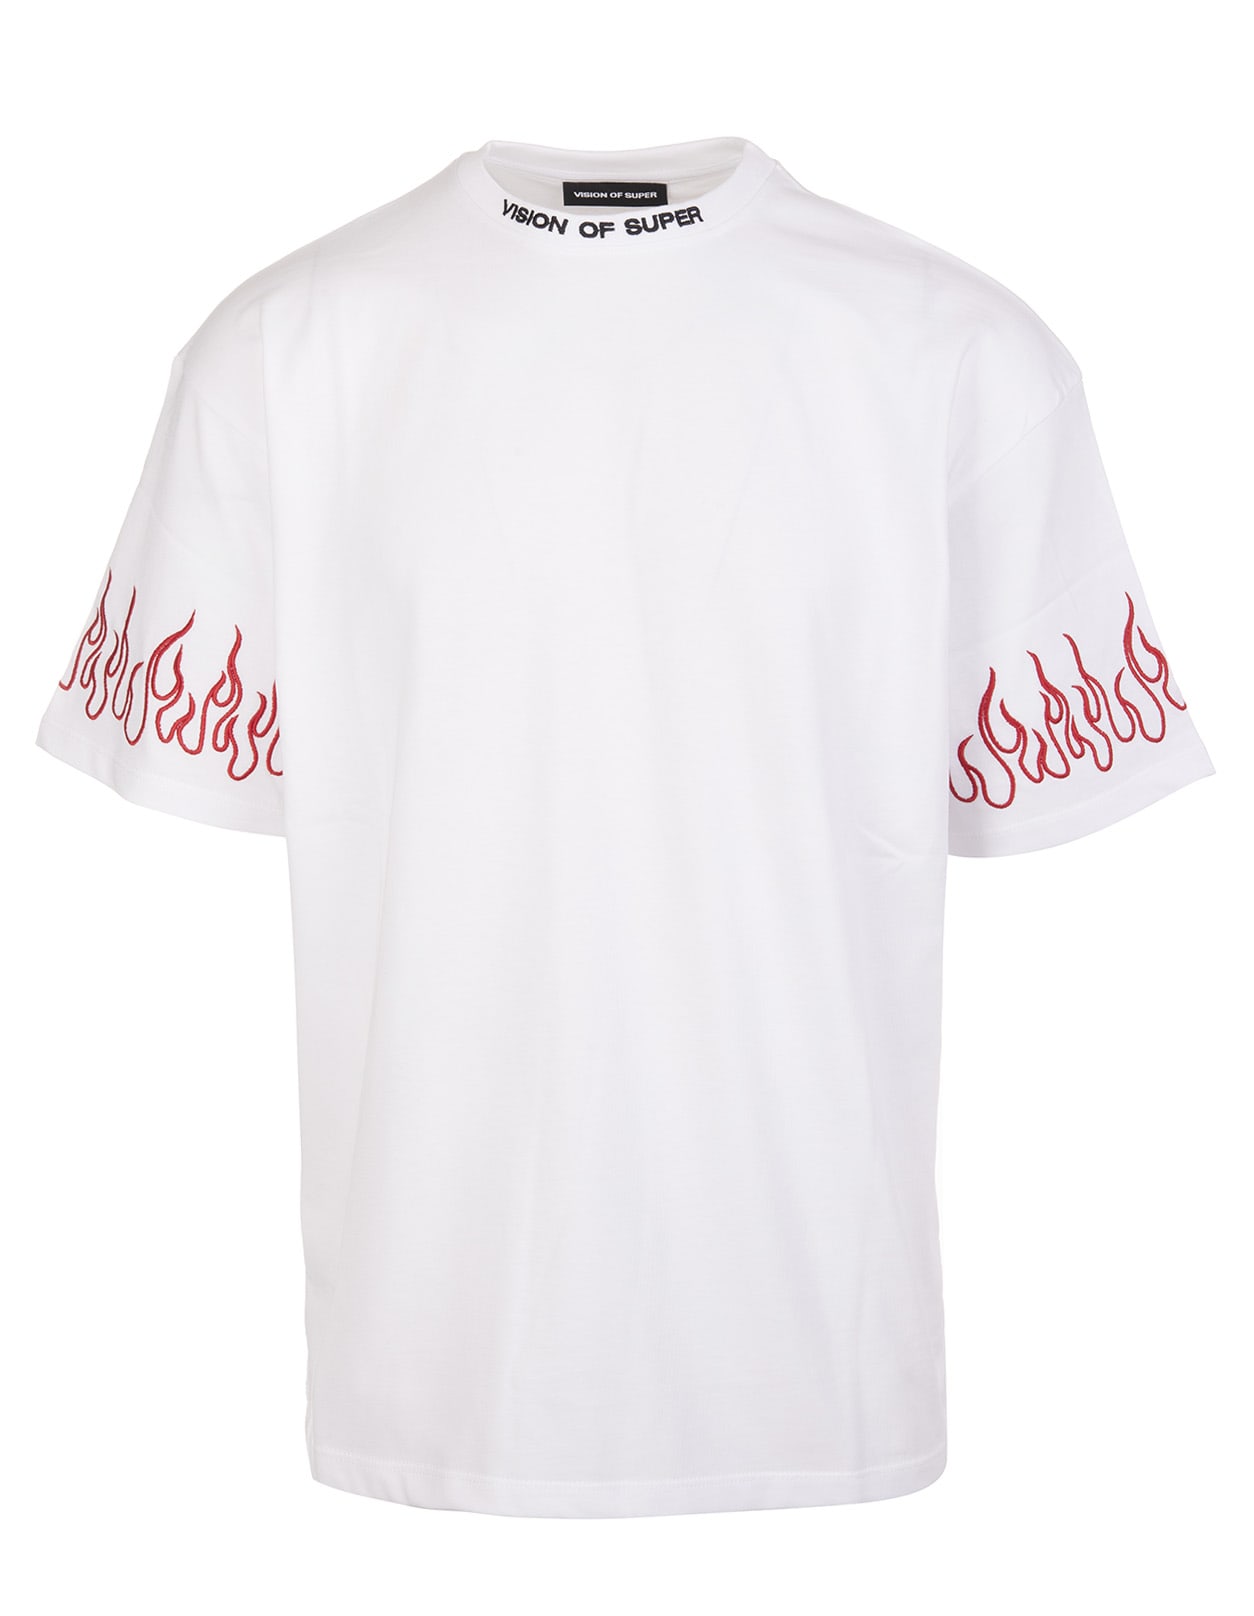 Vision of Super Man White T-shirt With Red Embroidered Flames